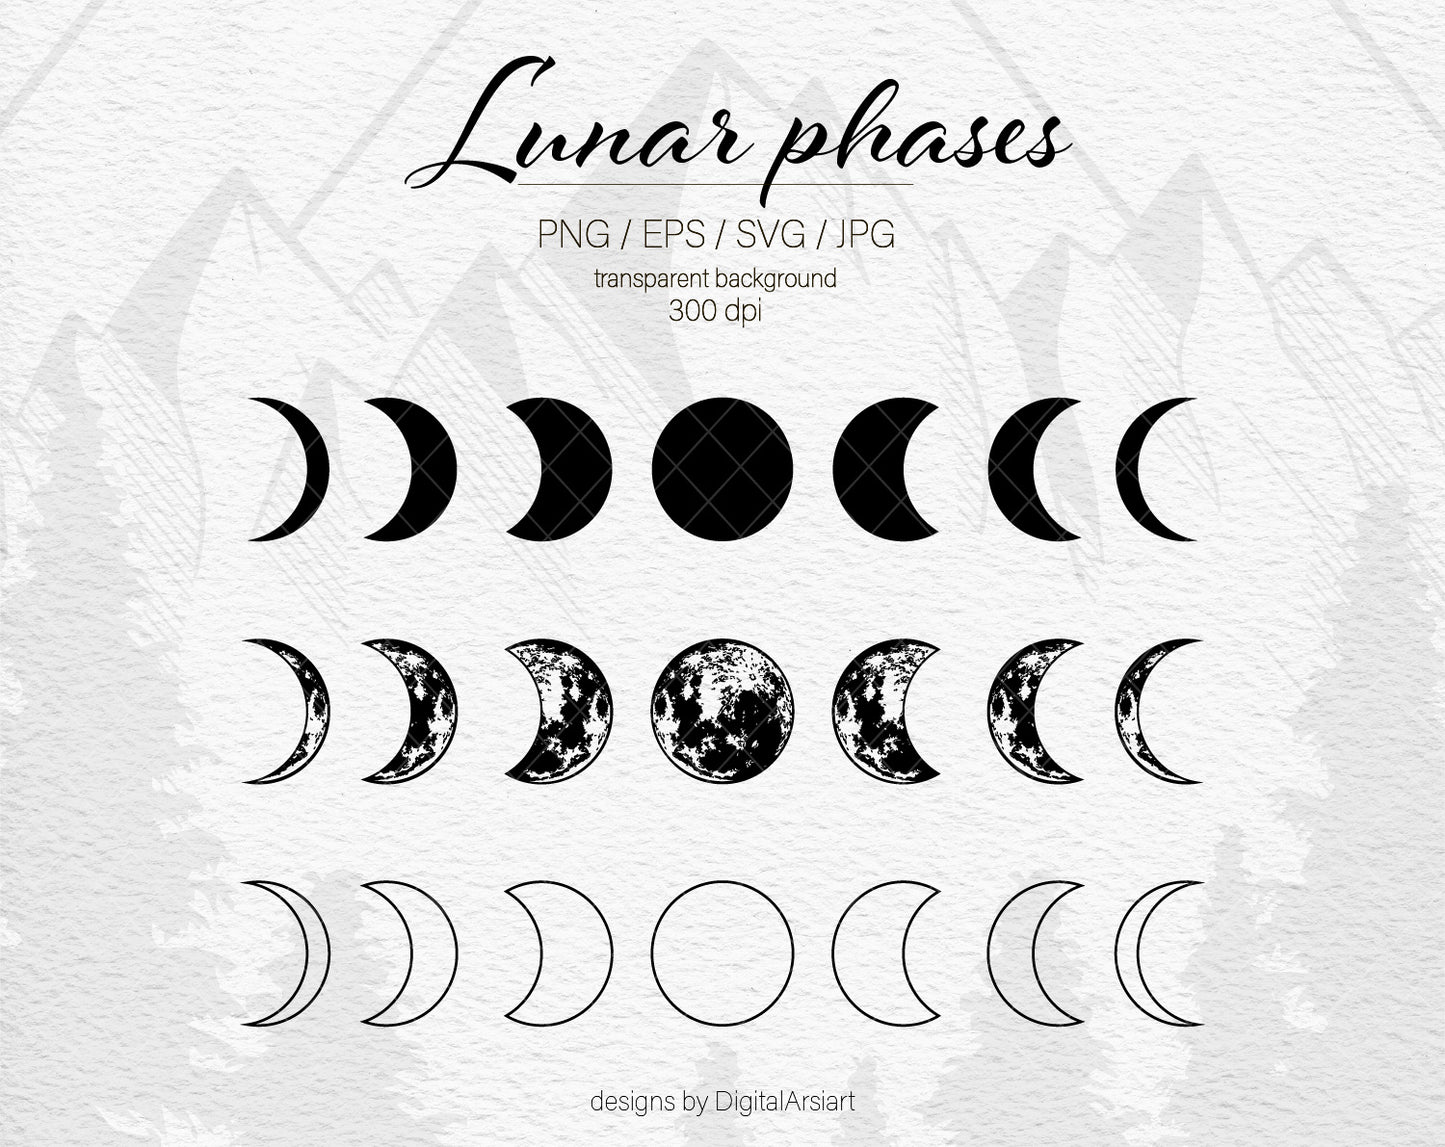 Moon phases svg - 0549